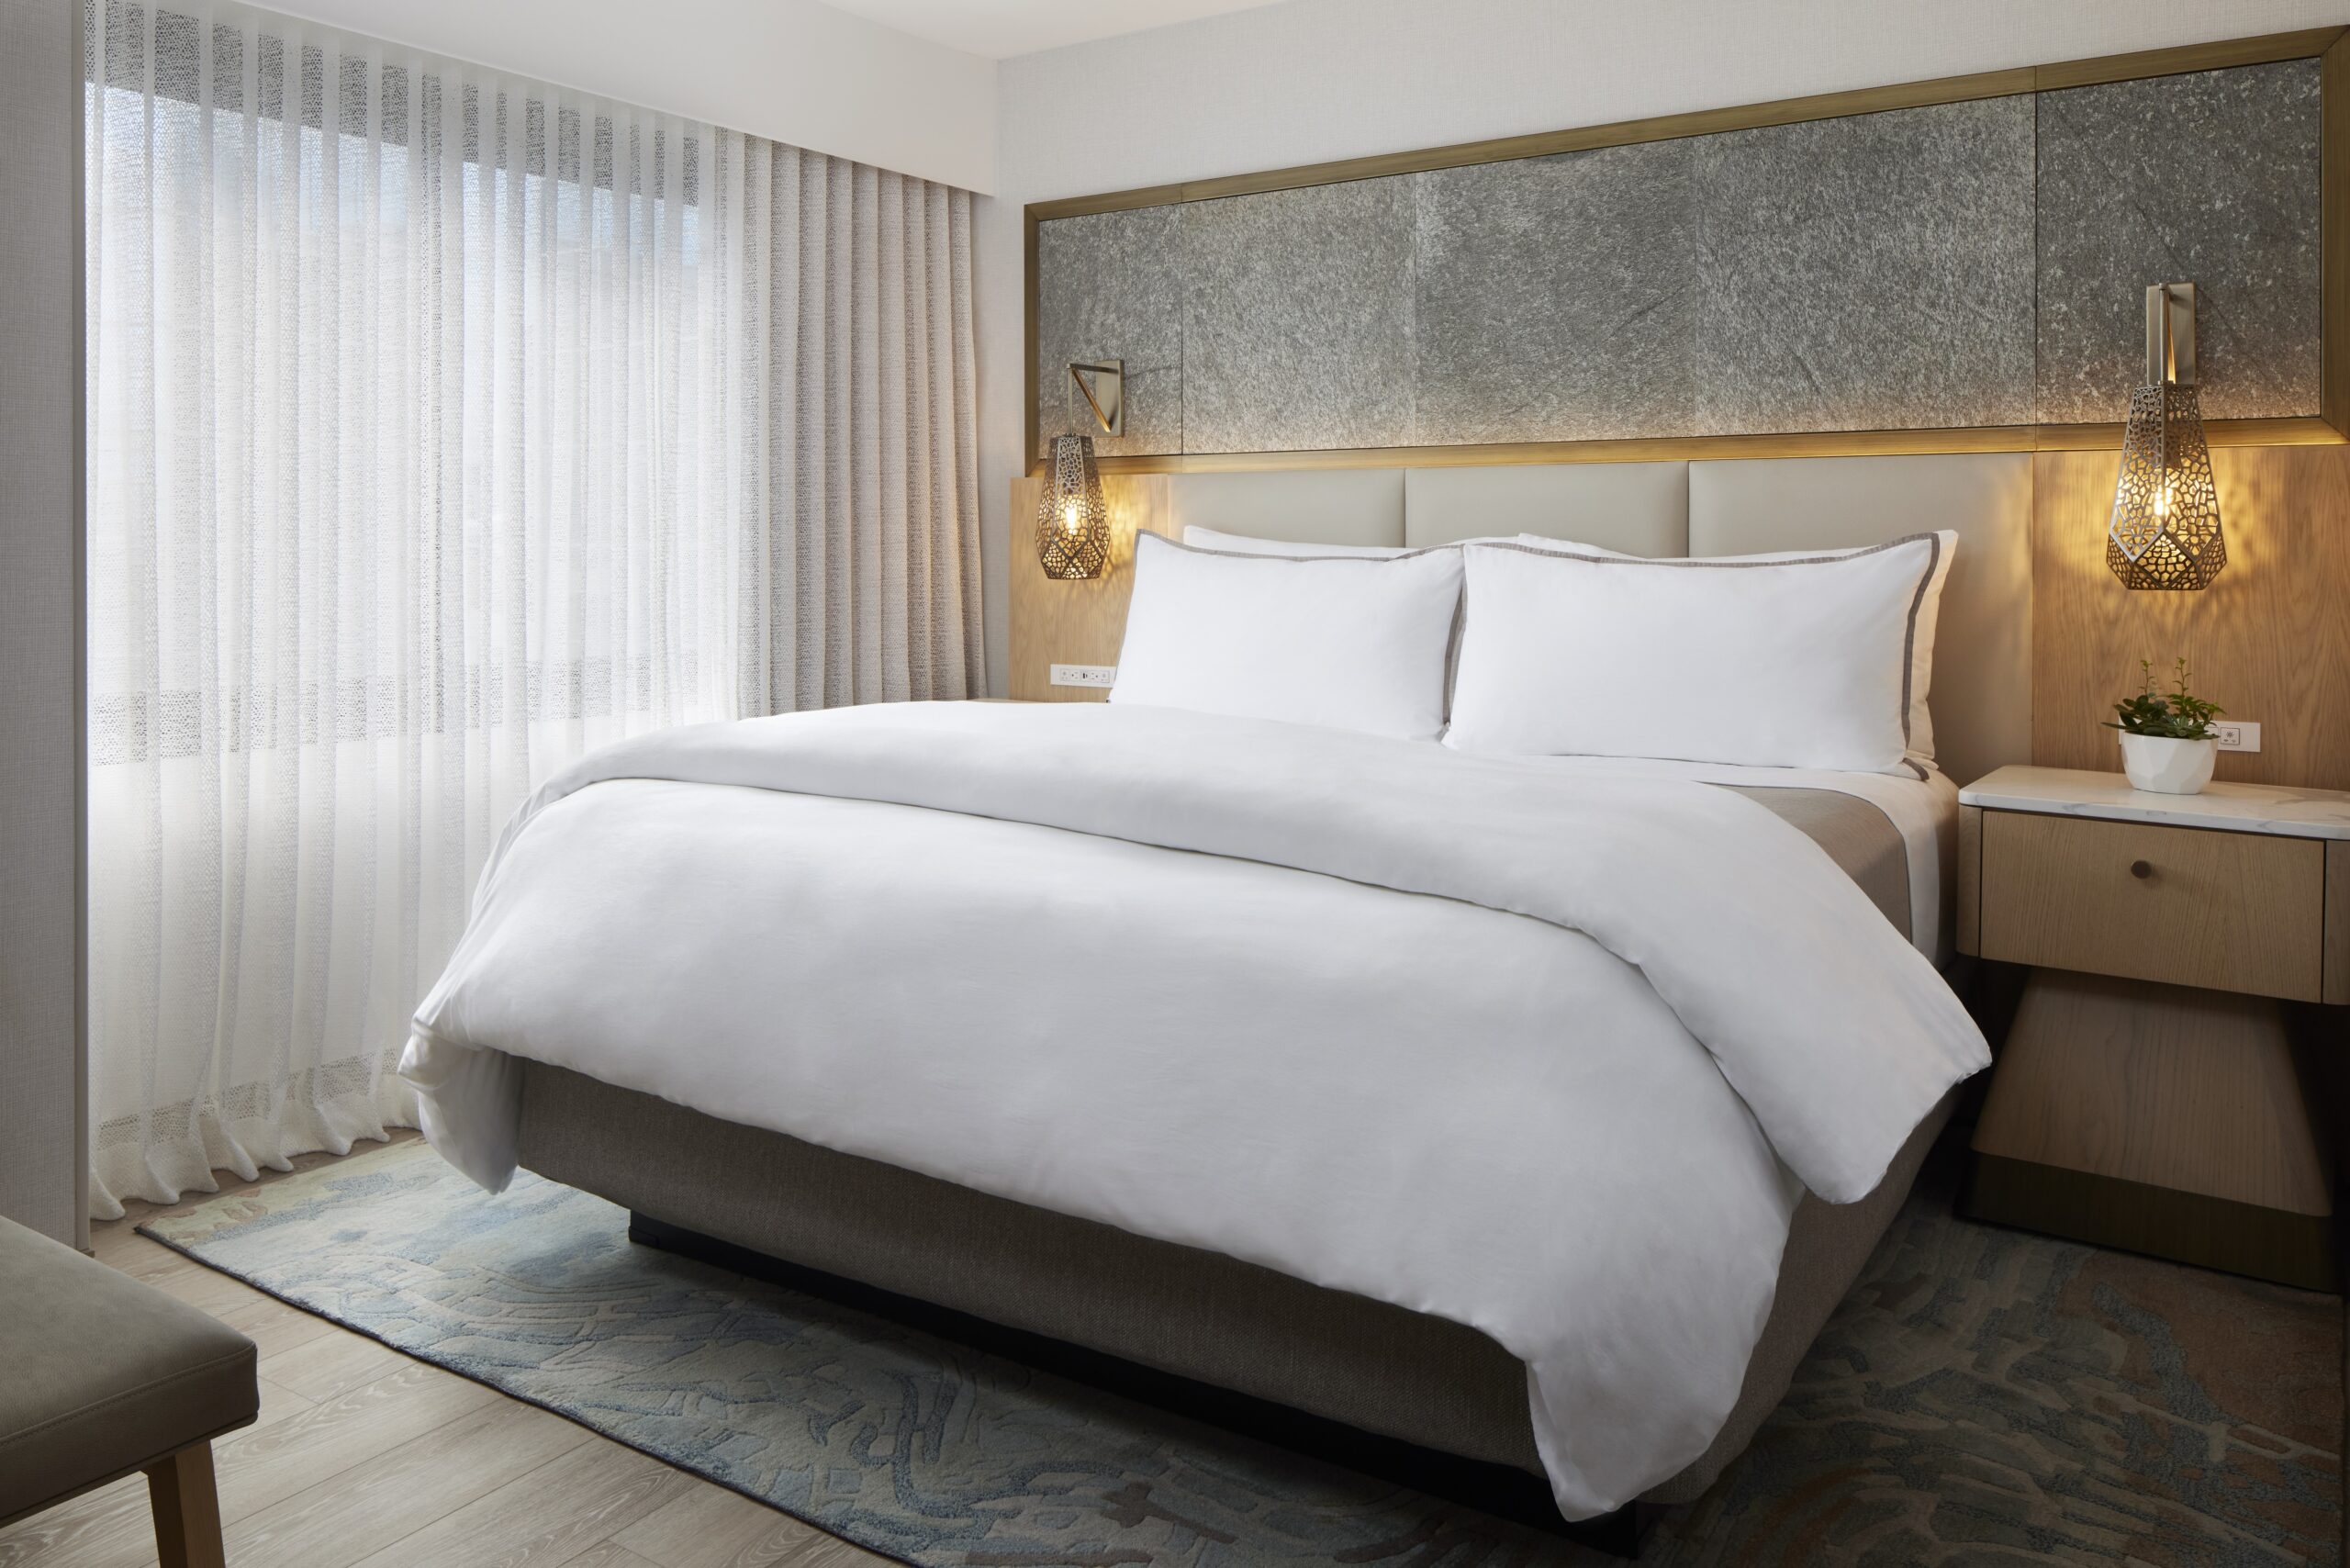 Westin Hotels & Resorts Bolsters its ‘Best in Bed’ Reputation with  the Global Debut of the Next Generation Heavenly Bed